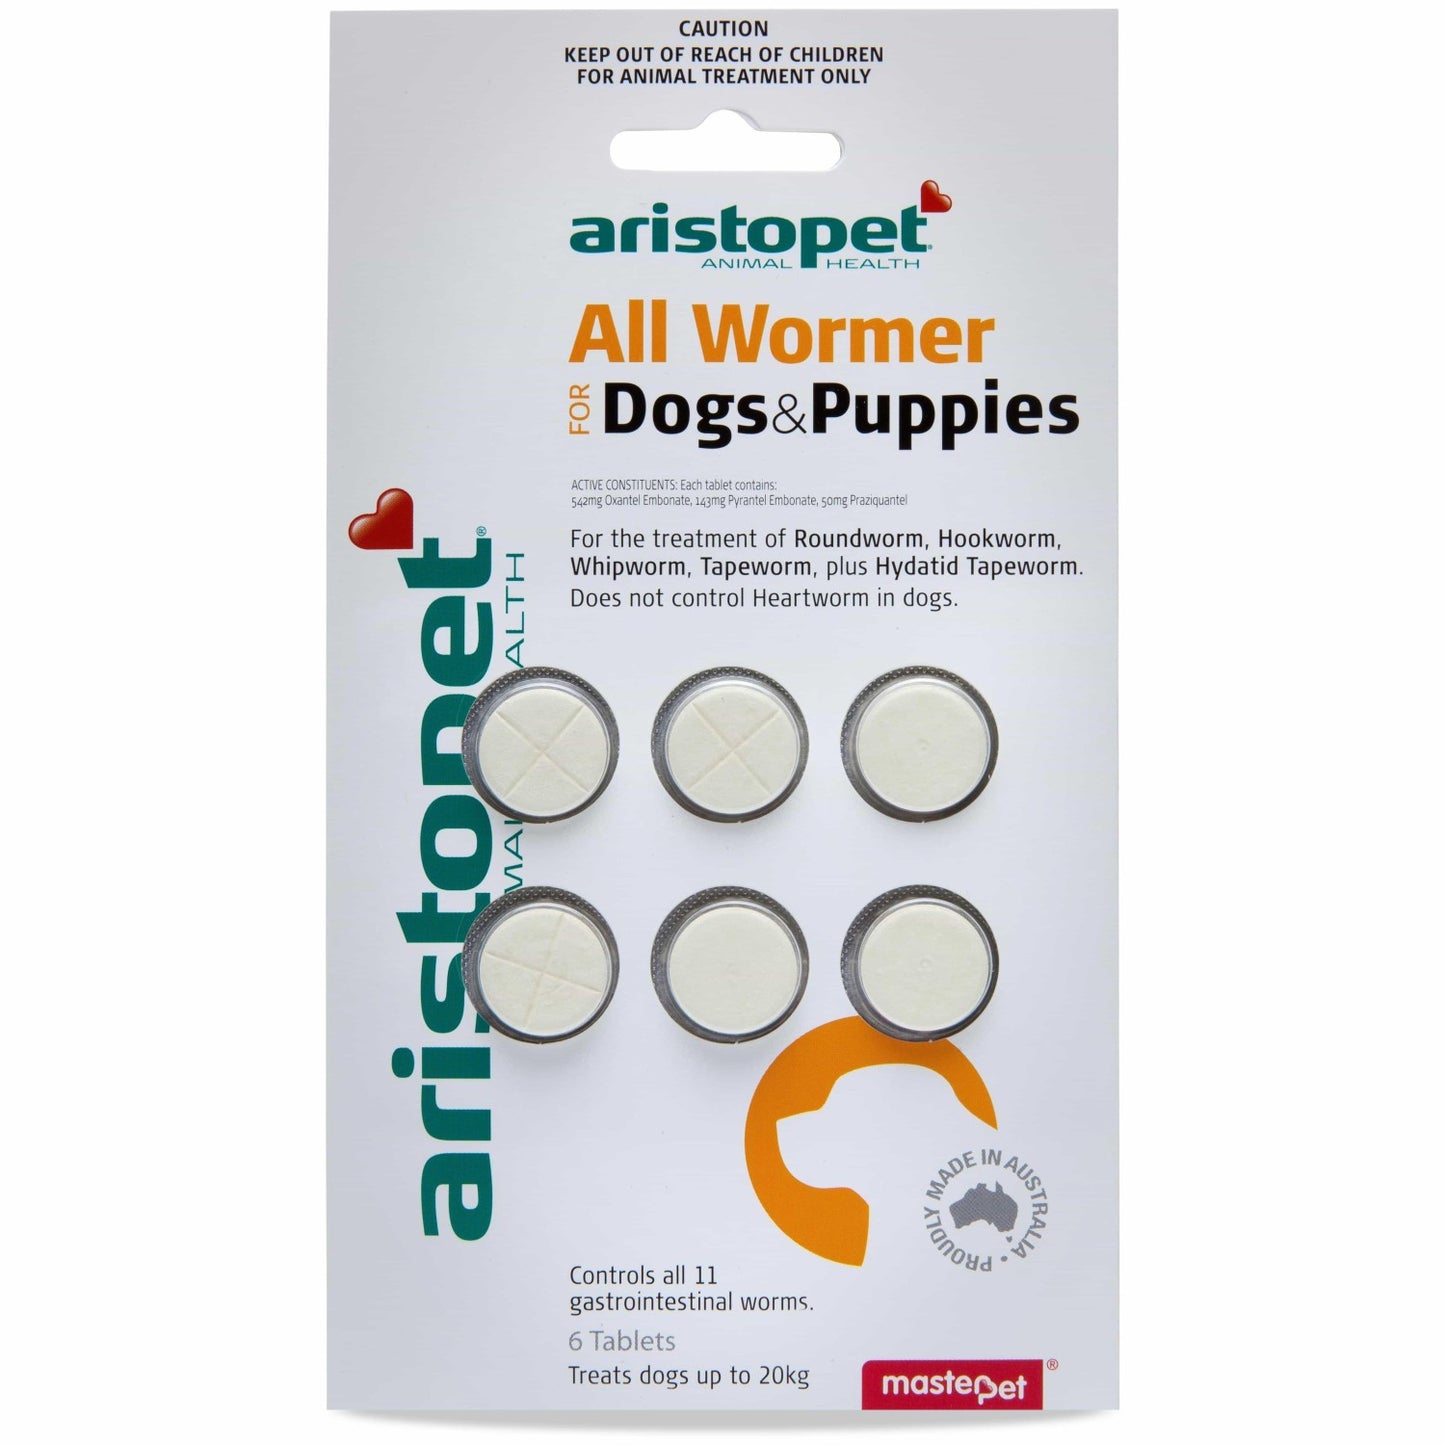 Aristopet All Wormer For Dogs & Puppies